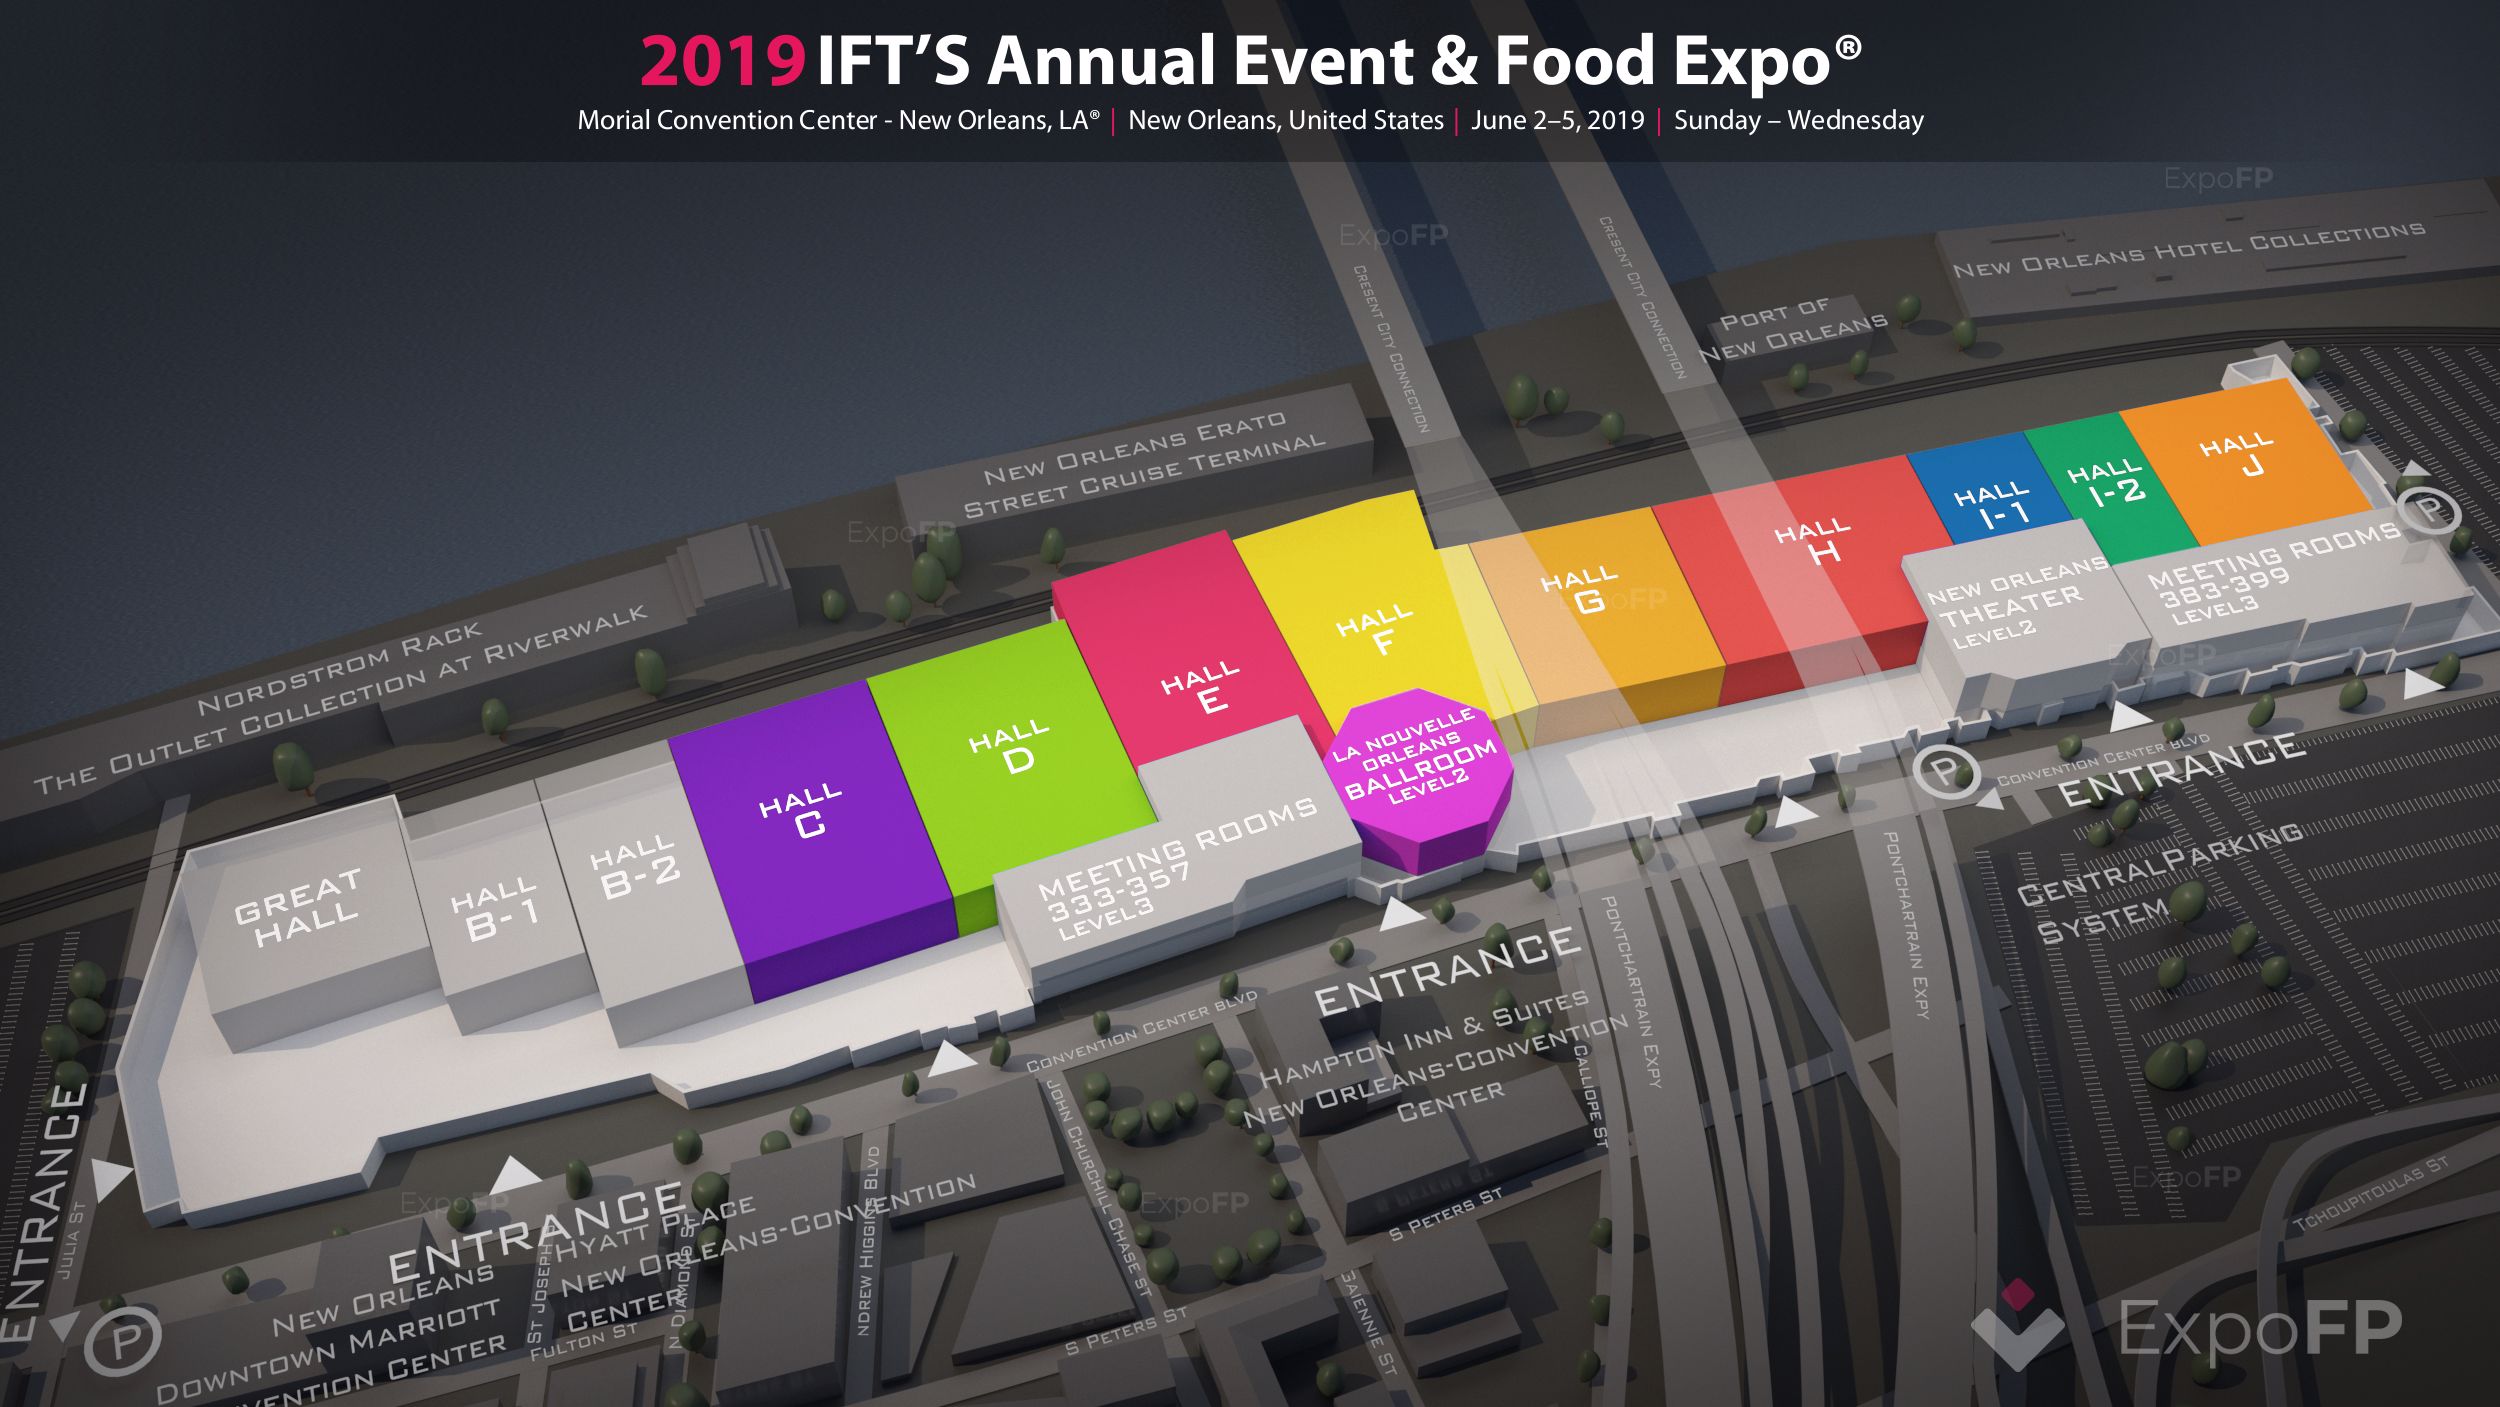 IFT’s Annual Event & Food Expo 2019 in Morial Convention